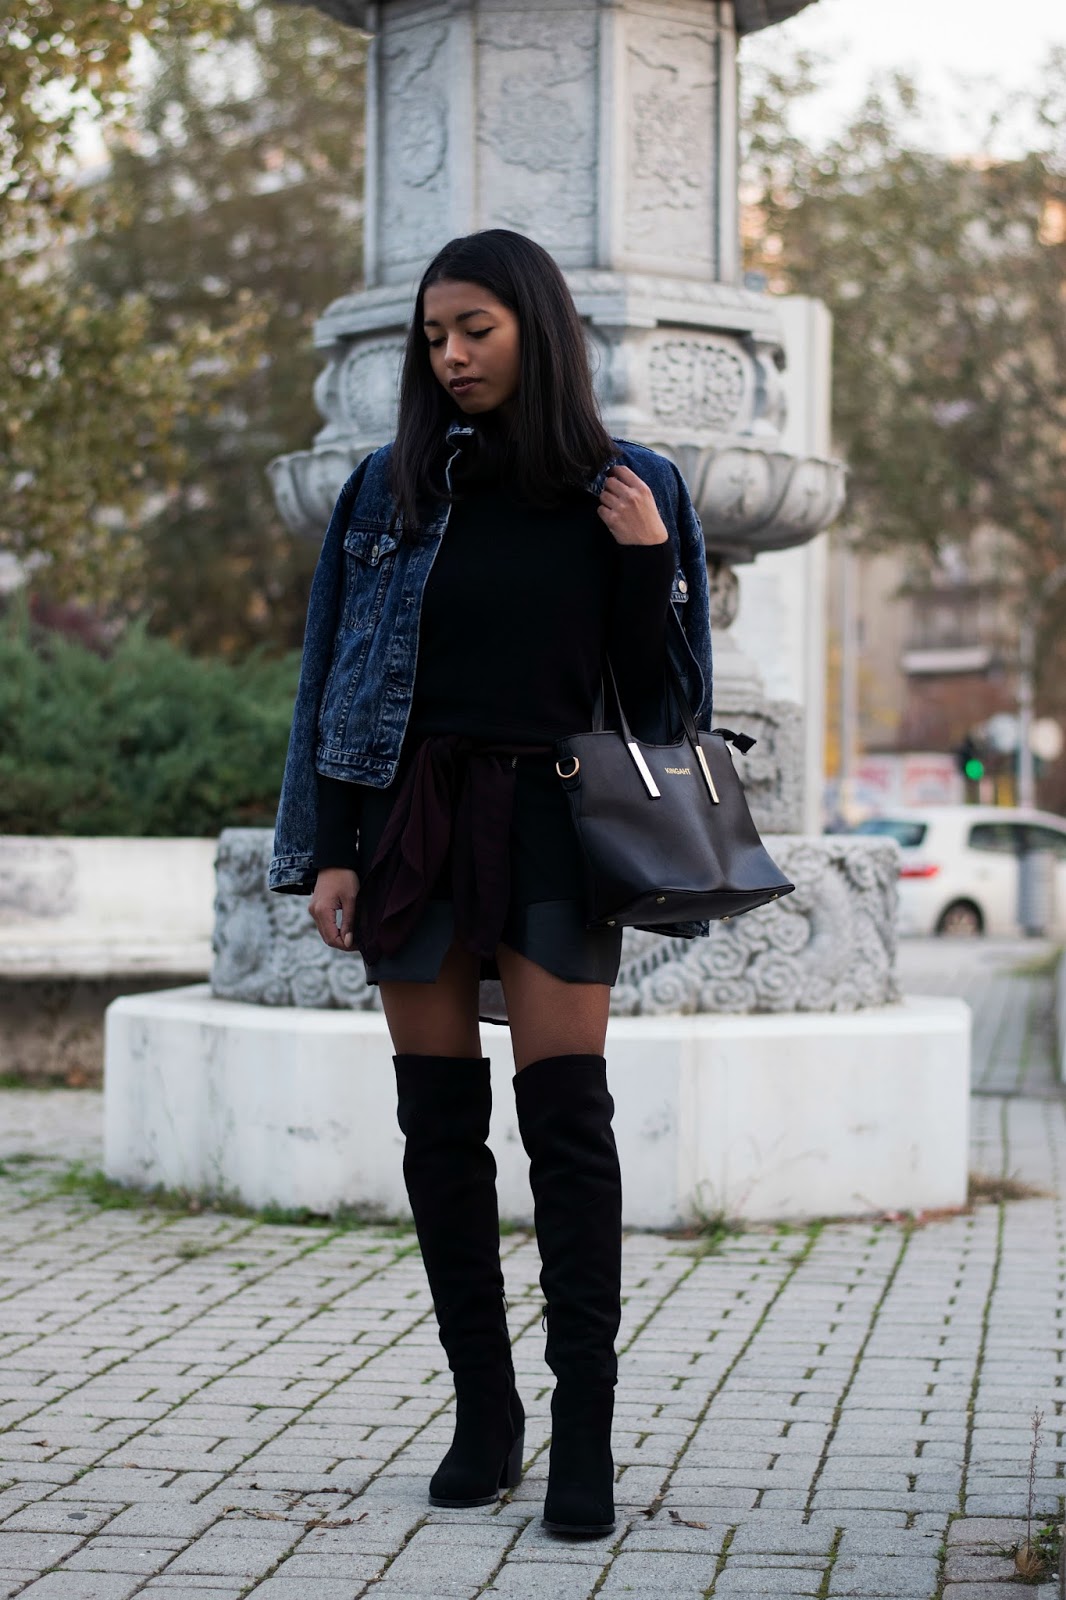 Leather skirts and cold days - K Meets Style